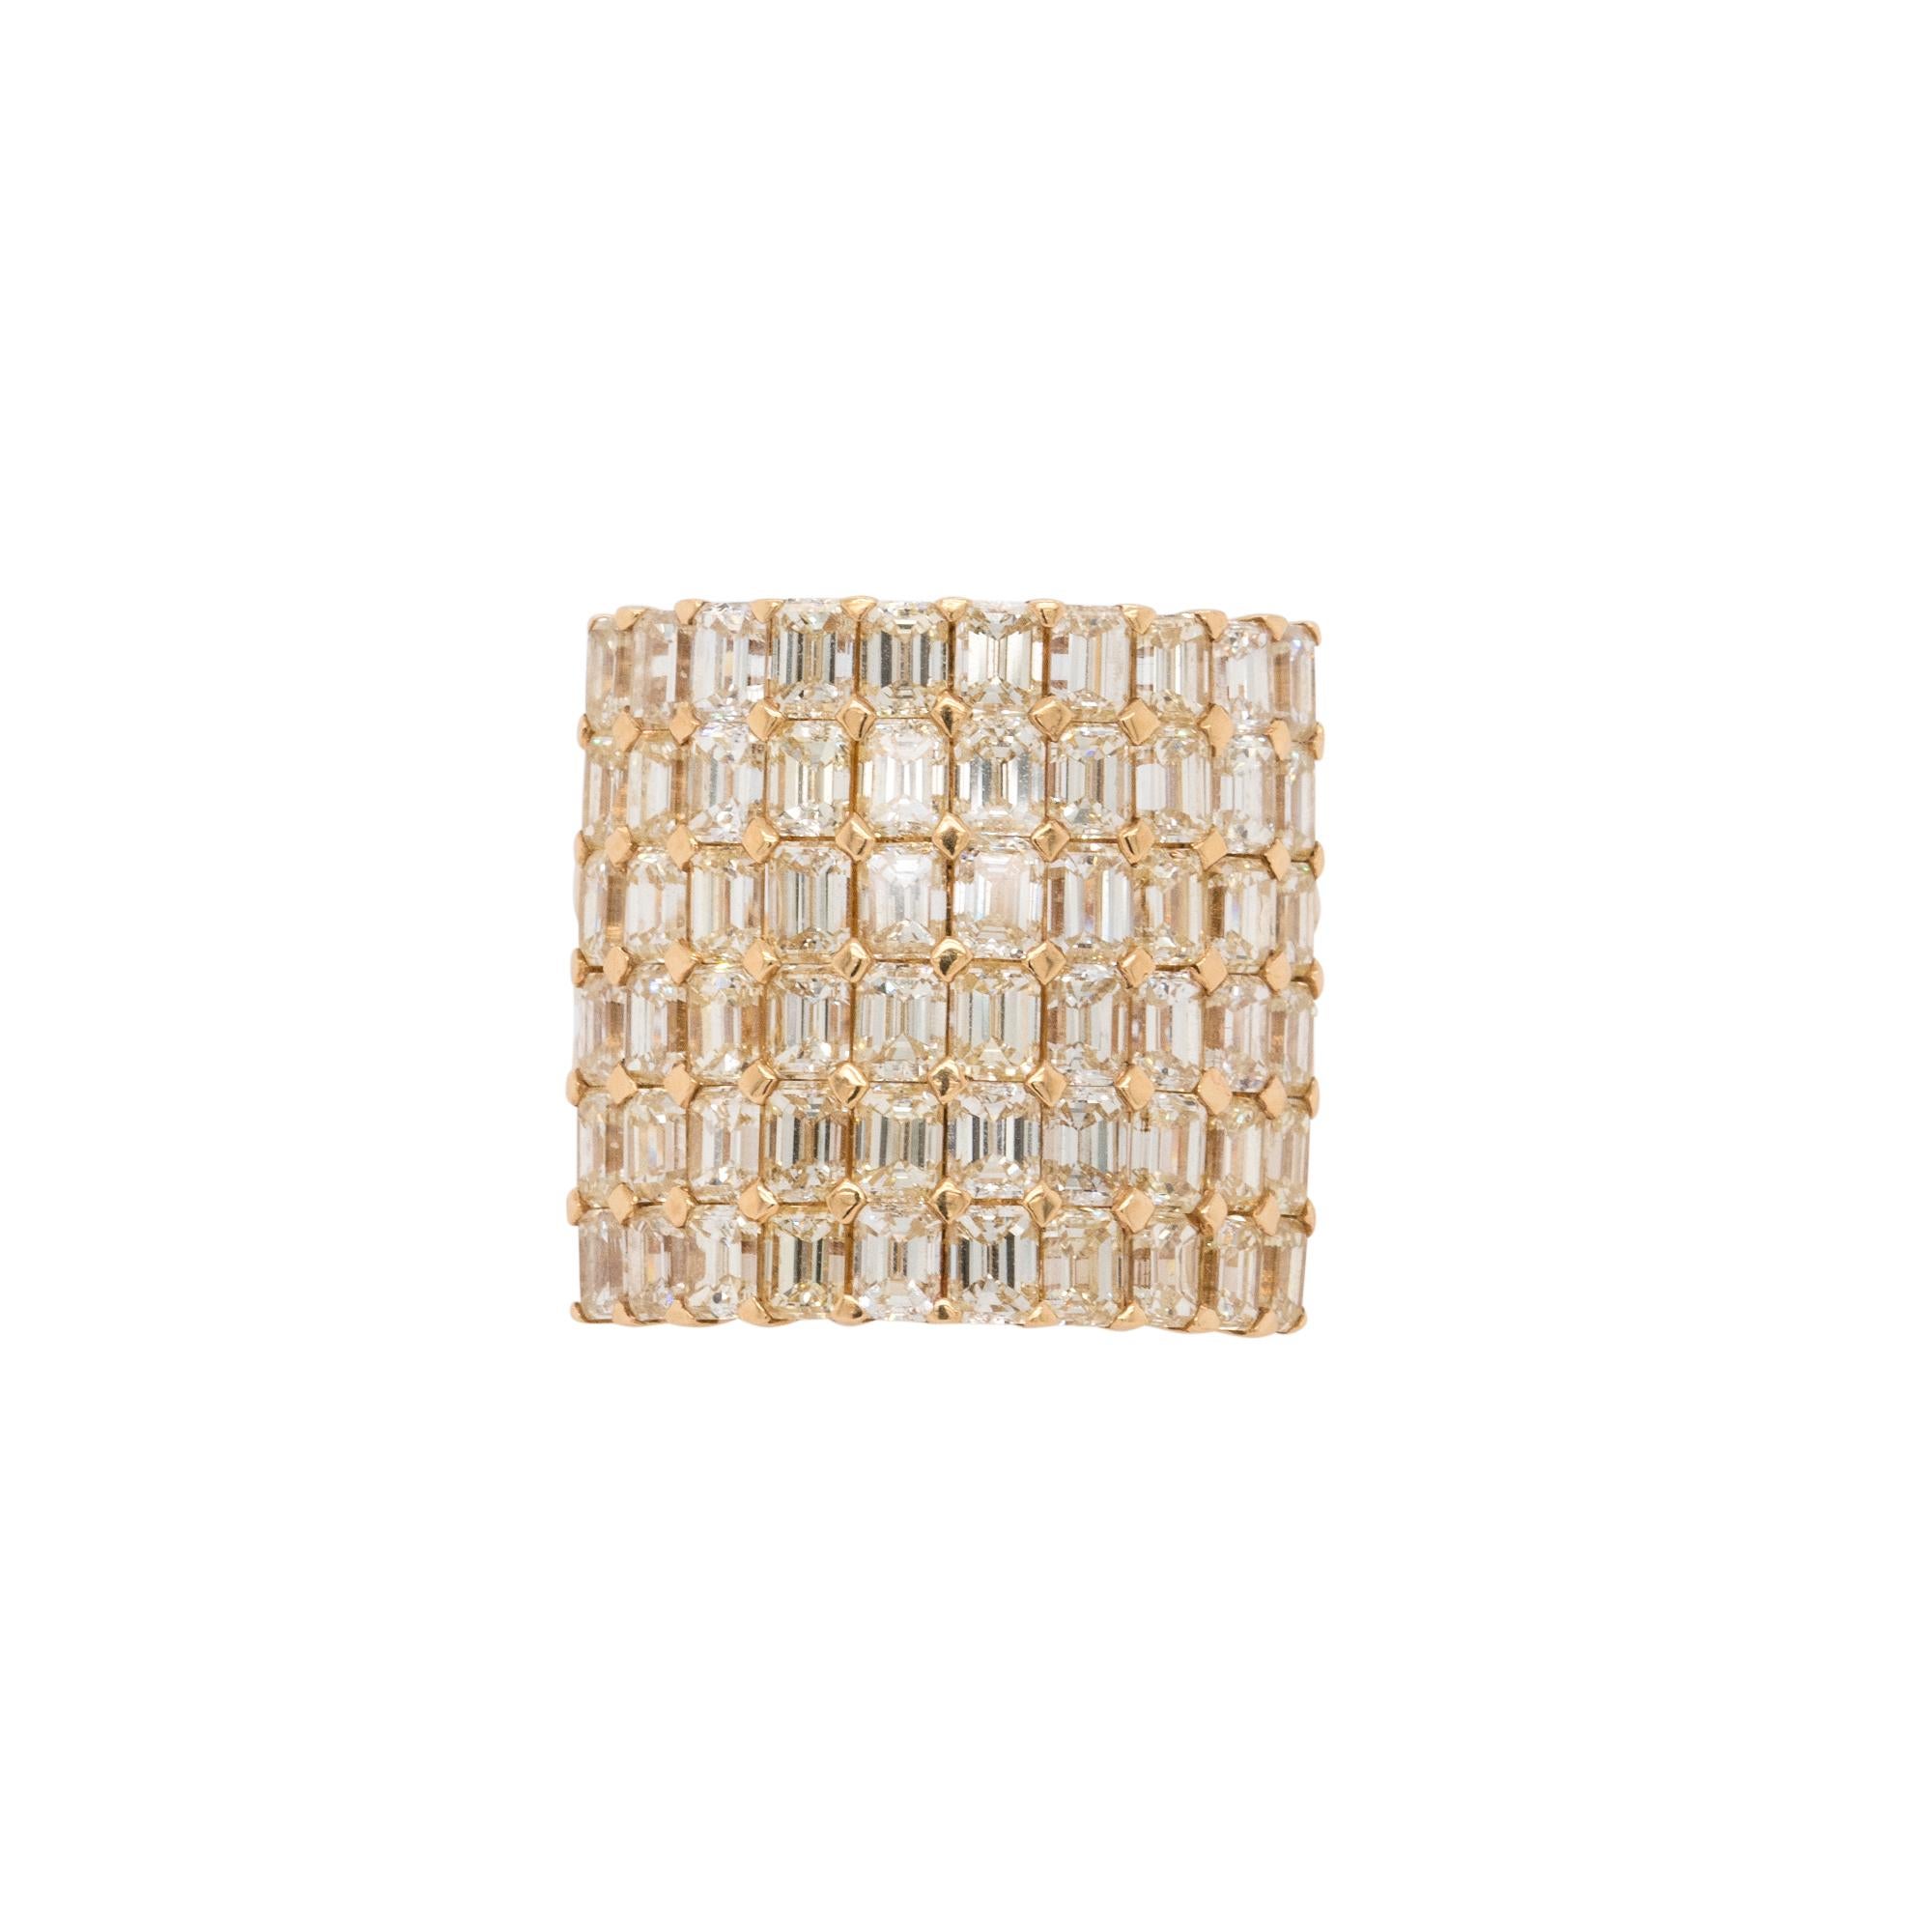 Material: 18k yellow gold
Diamond Details: Approximately 8ctw of emerald cut diamonds. Diamonds are G/H in color and VS in clarity.
Item Weight: 11.8g
Ring Size: 7
Additional Details: This item comes with a  presentation box!
SKU; R4845